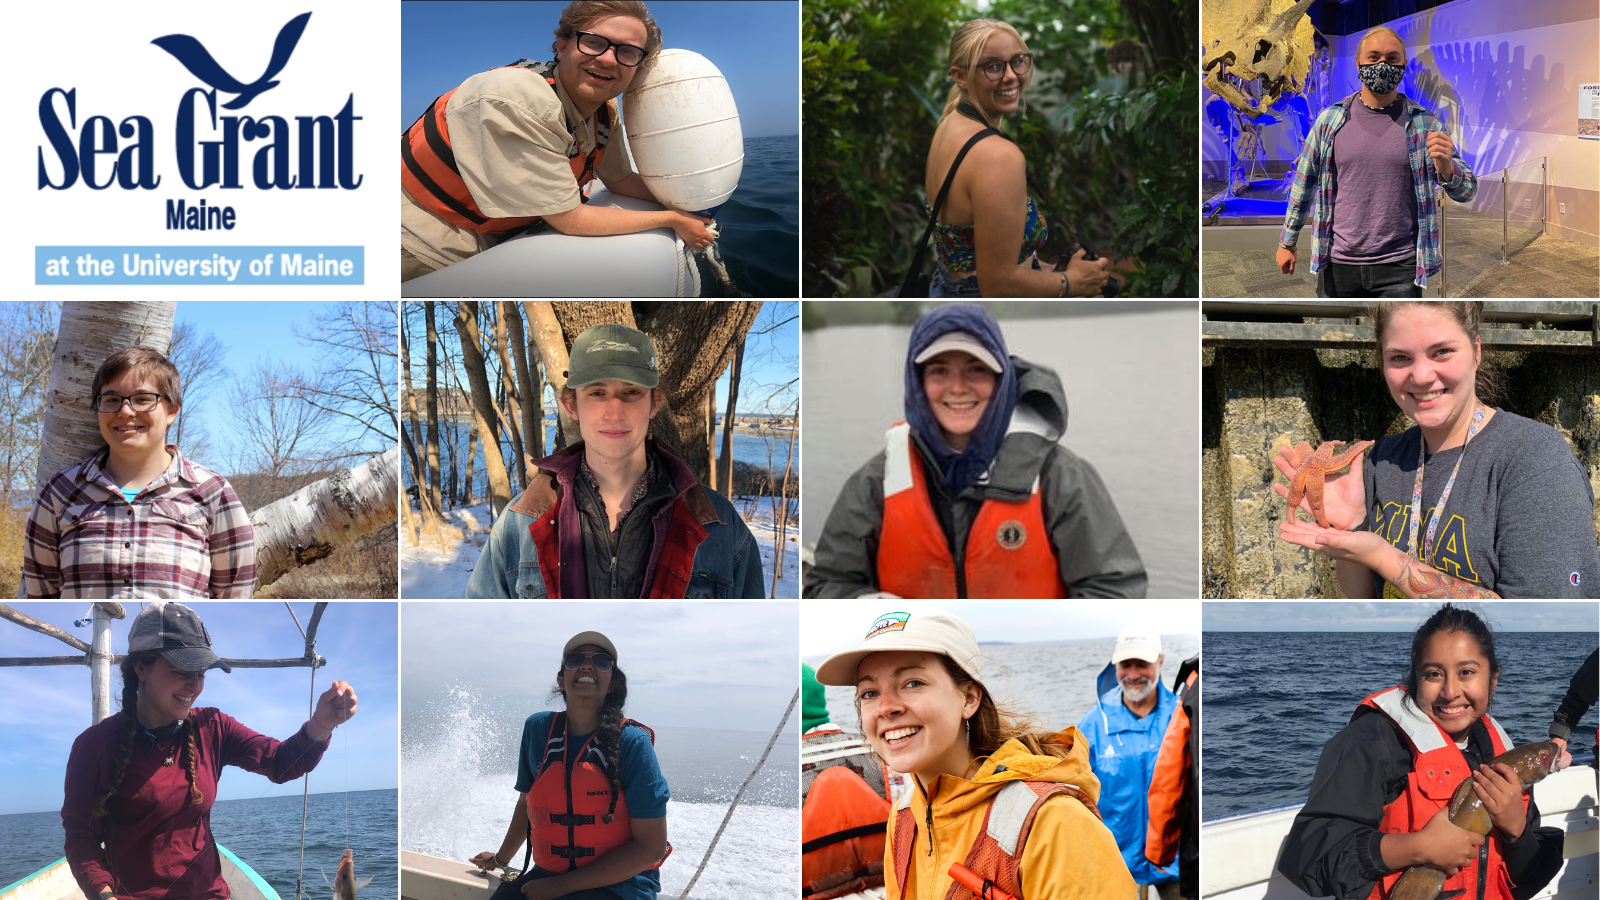 11 Sea Grant Scholars' headshots in a collage with the Maine Sea Grant logo